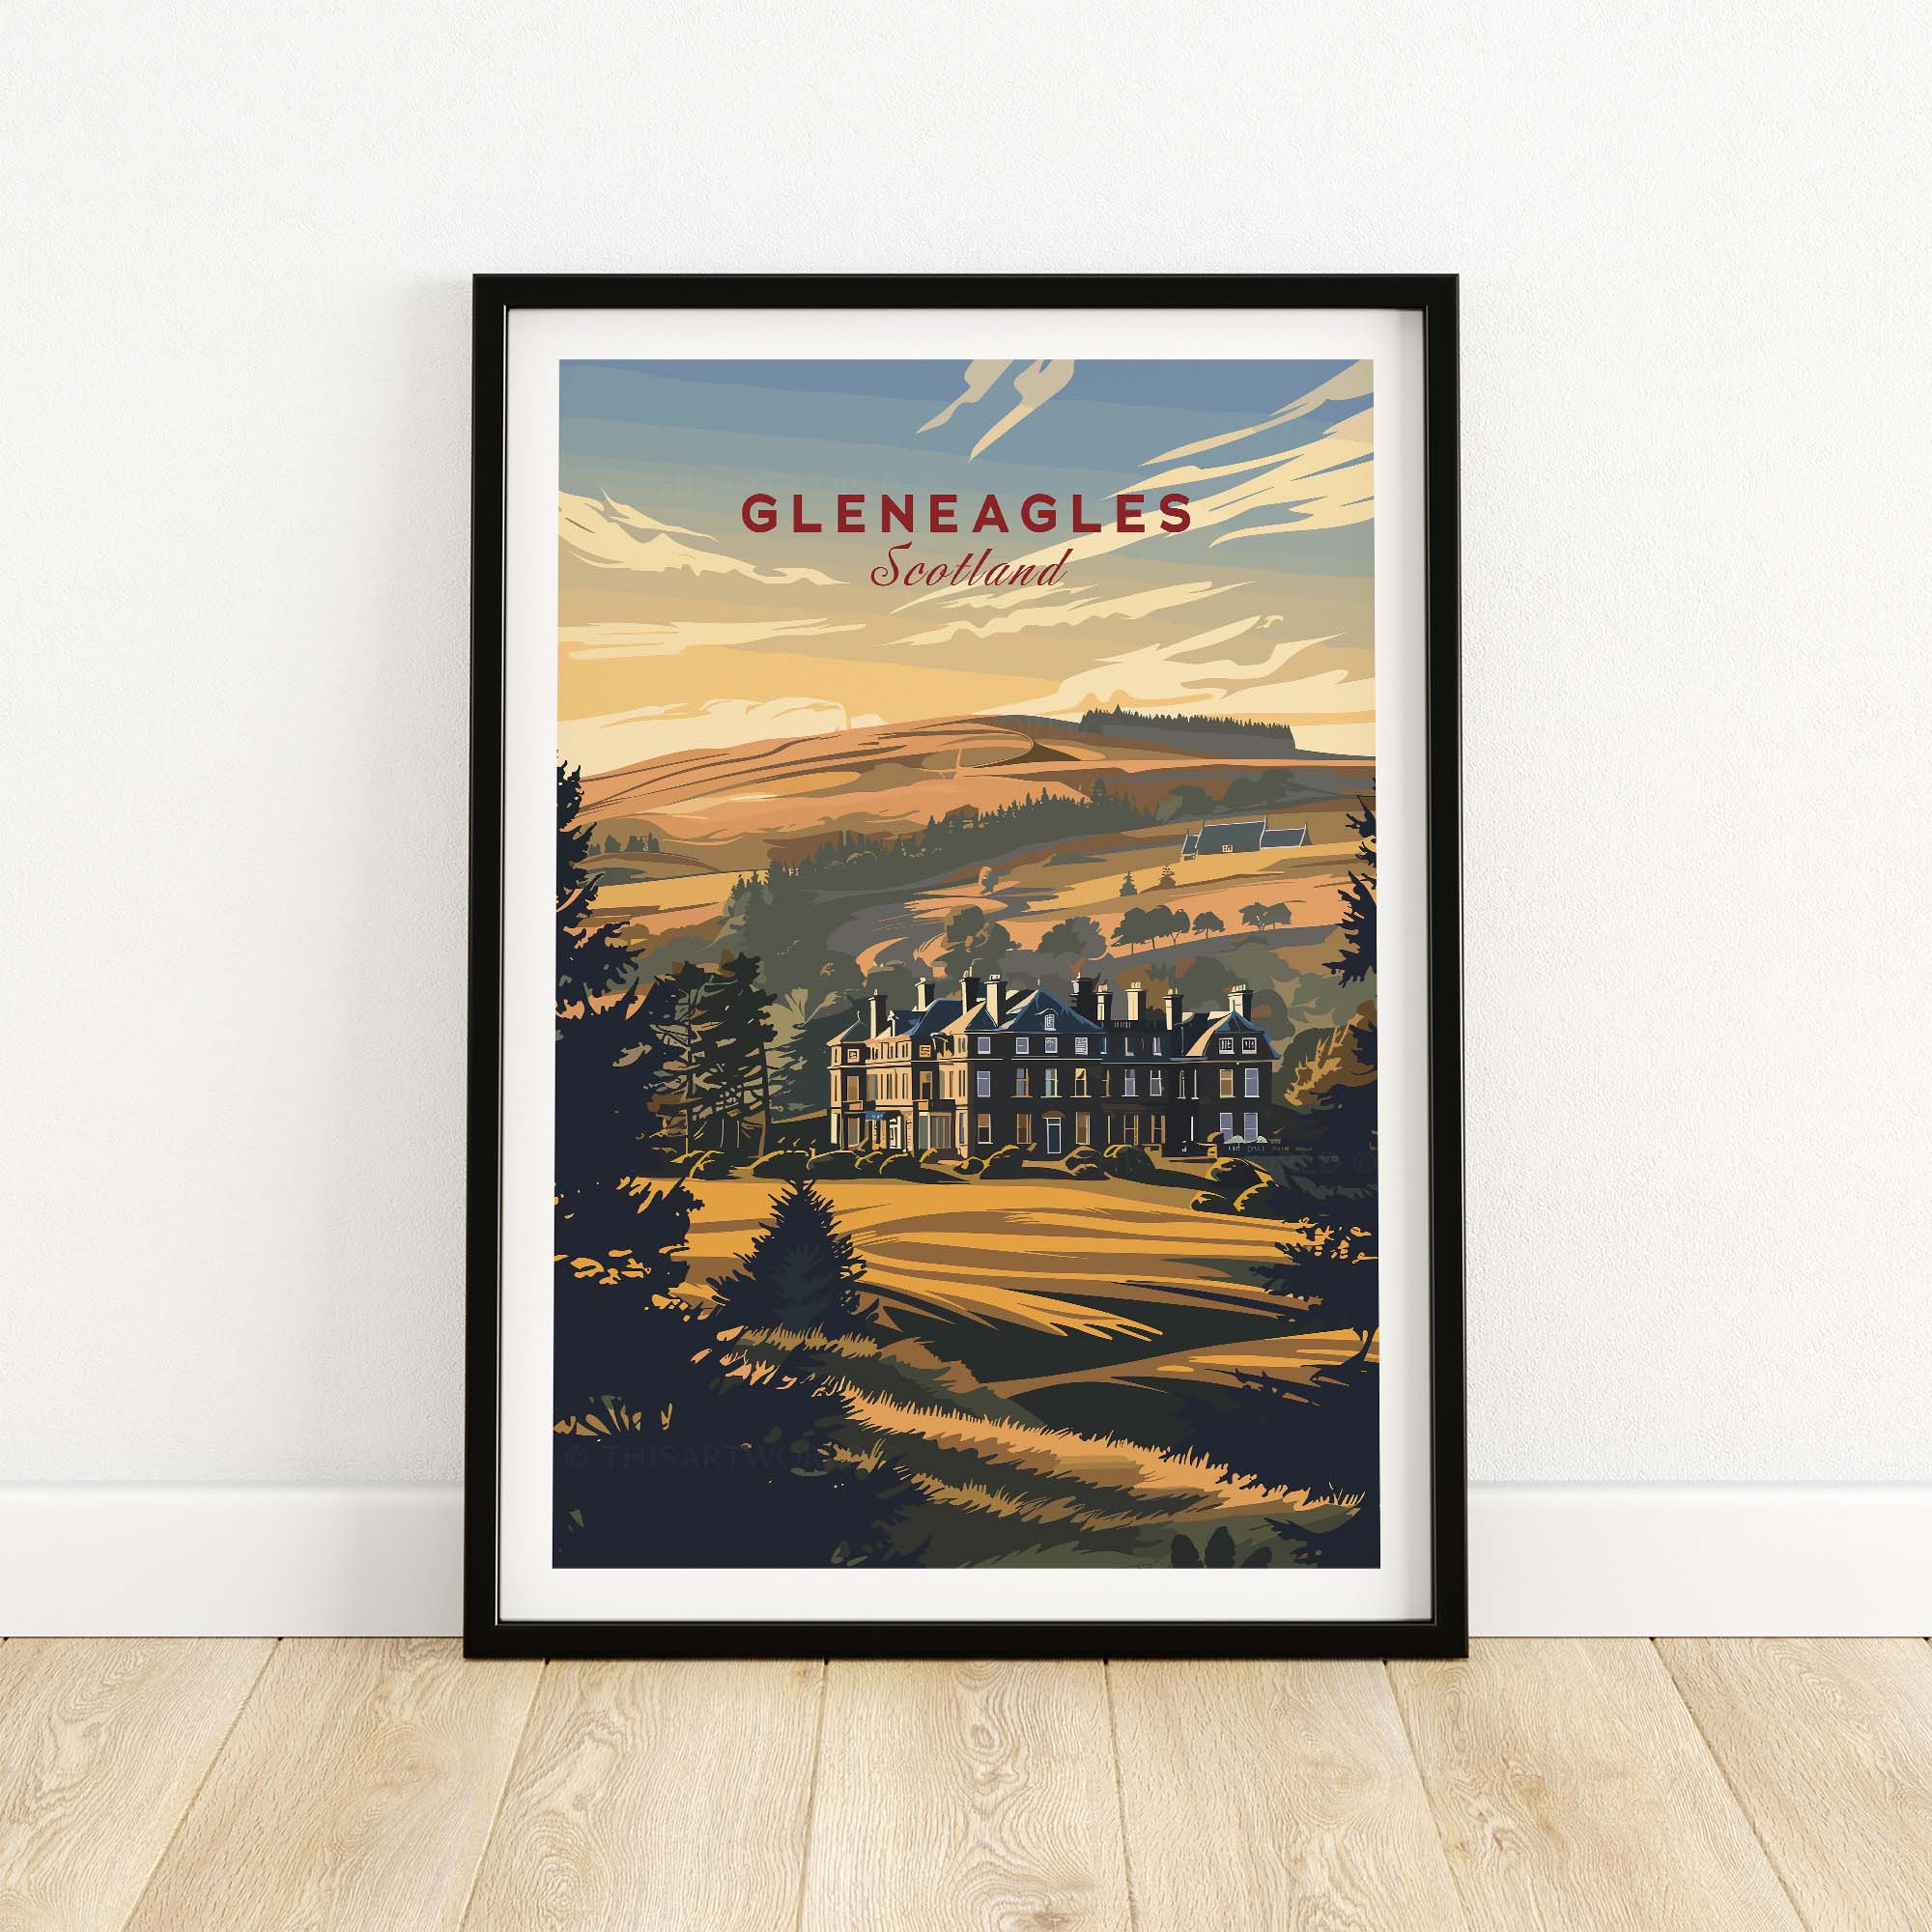 Gleneagles Poster Scotland part of our best collection or travel posters and prints - ThisArtWorld